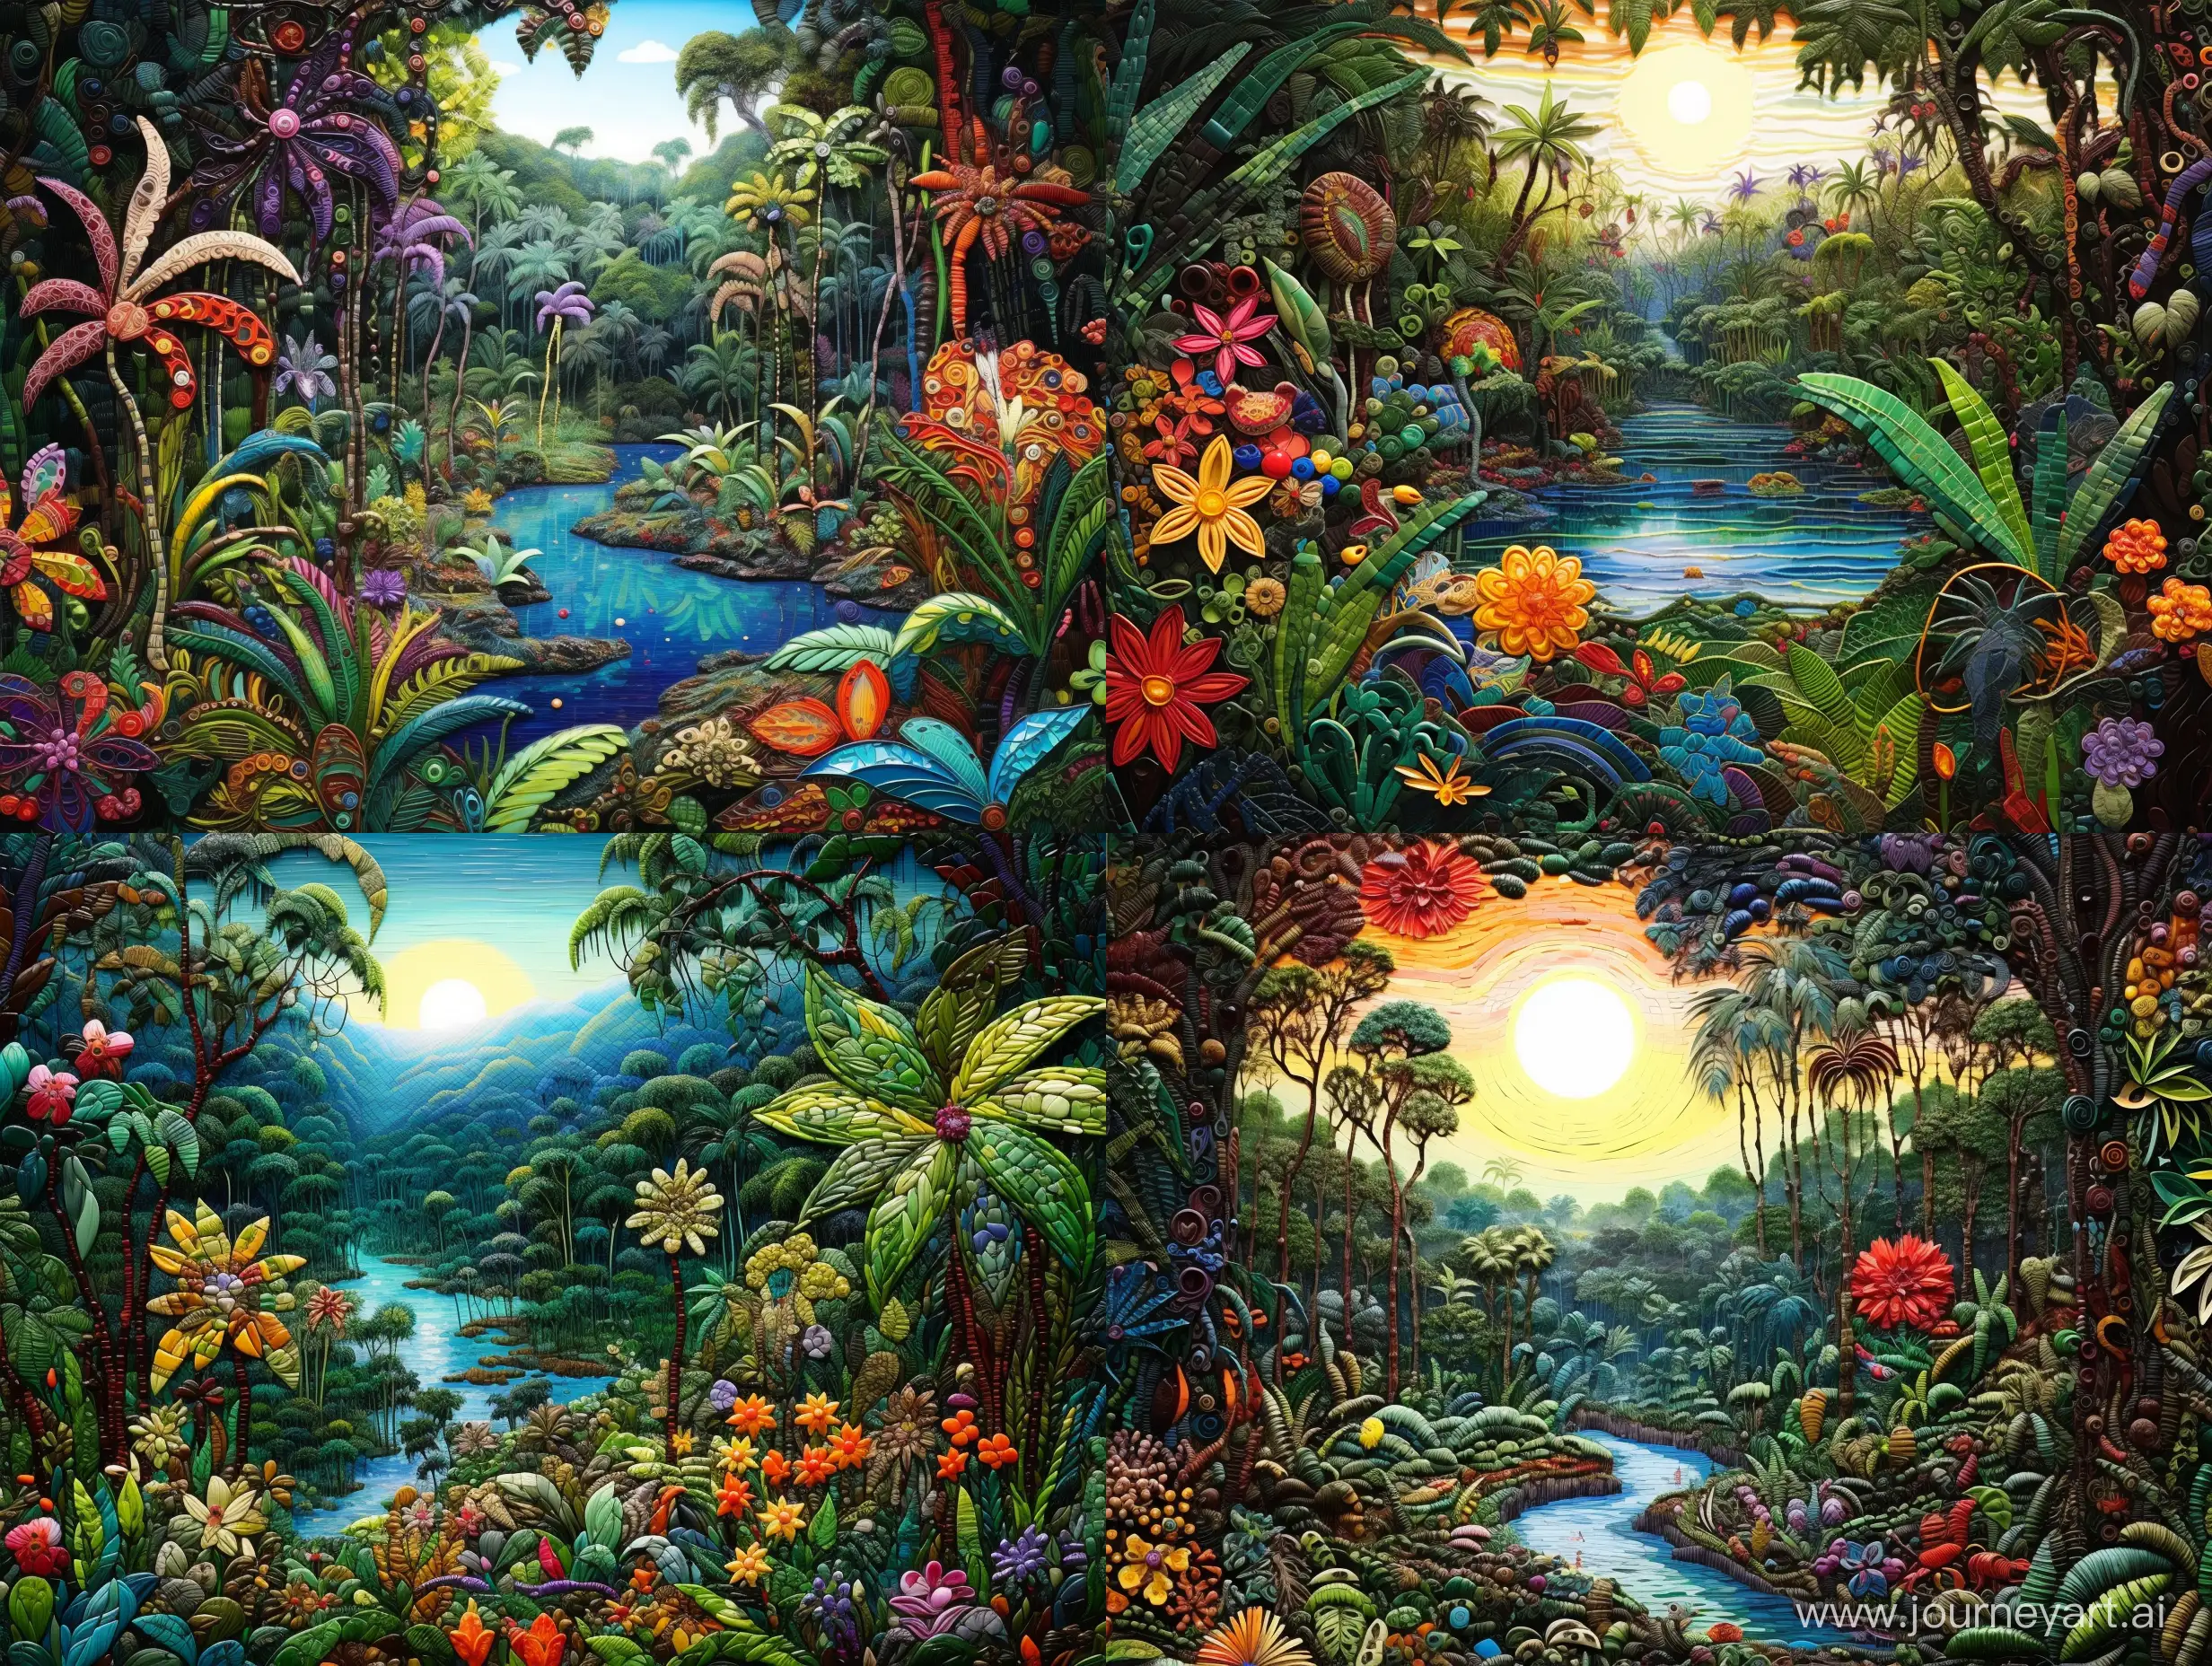 Exquisite-Amazon-Forest-Landscape-Crafted-with-Buttons-Beads-Ribbons-and-Paper-UltraDetailed-Artwork